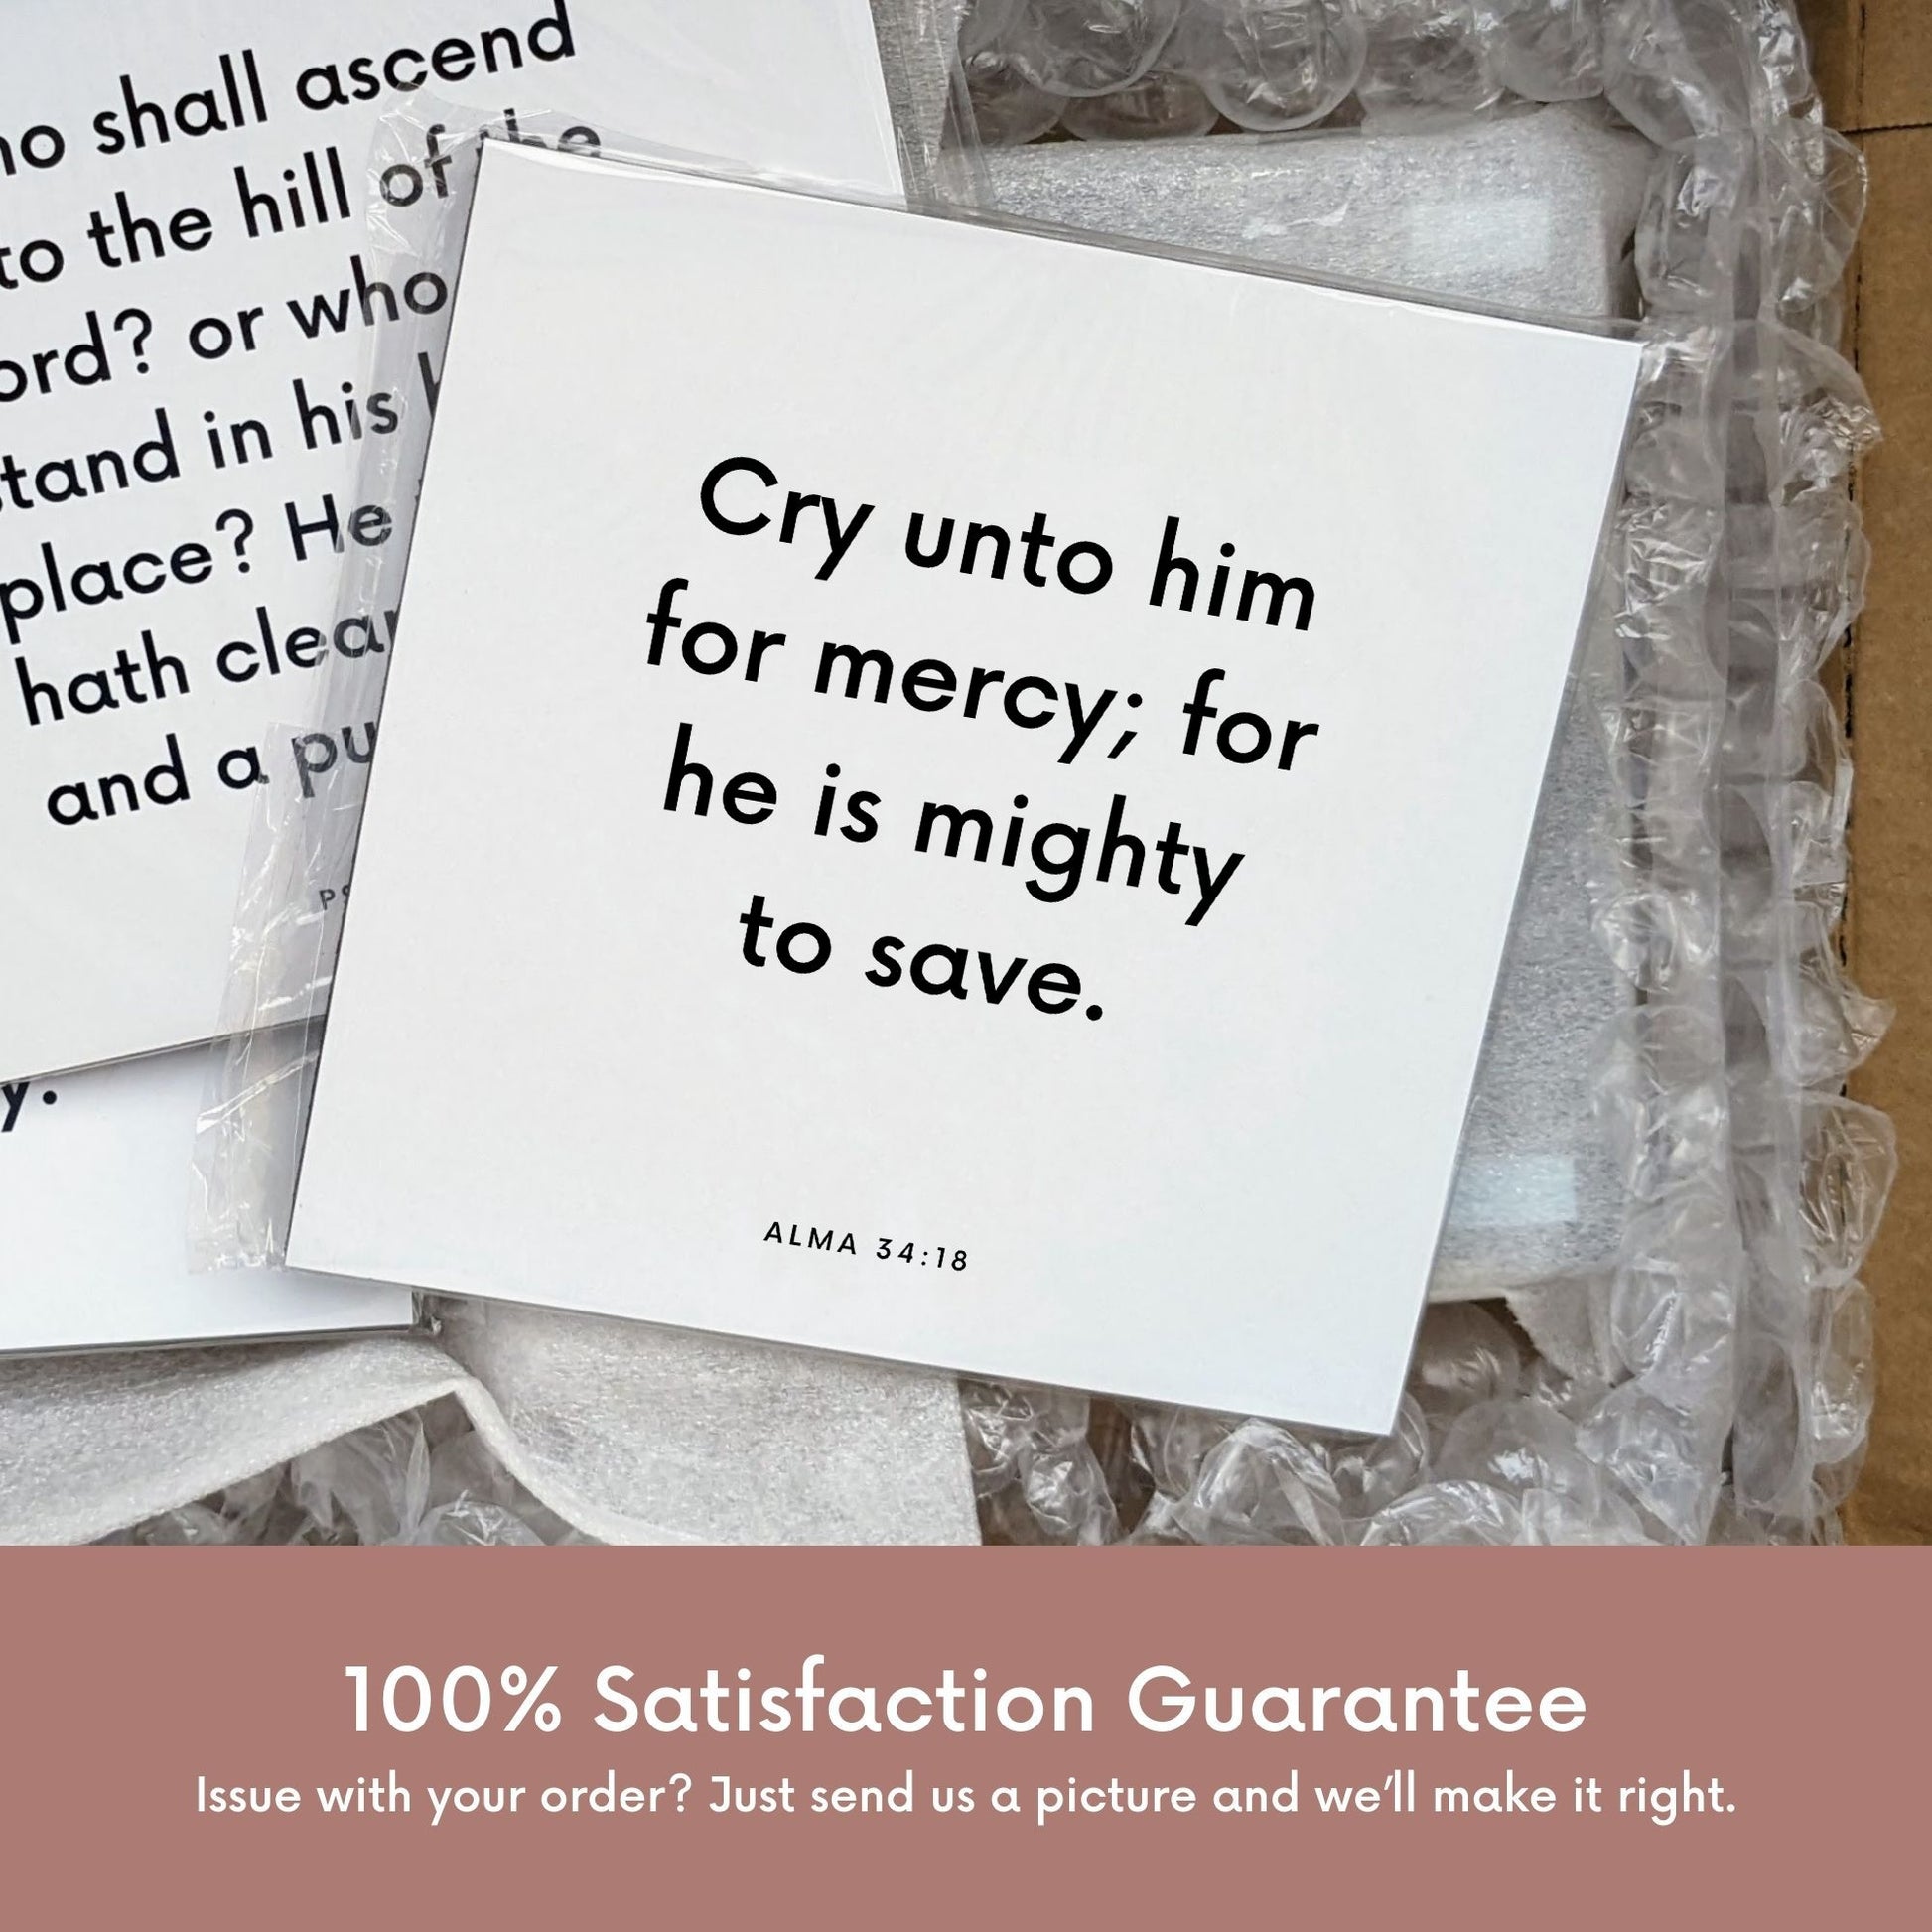 Shipping materials for scripture tile of Alma 34:18 - "Cry unto him for mercy; for he is mighty to save."